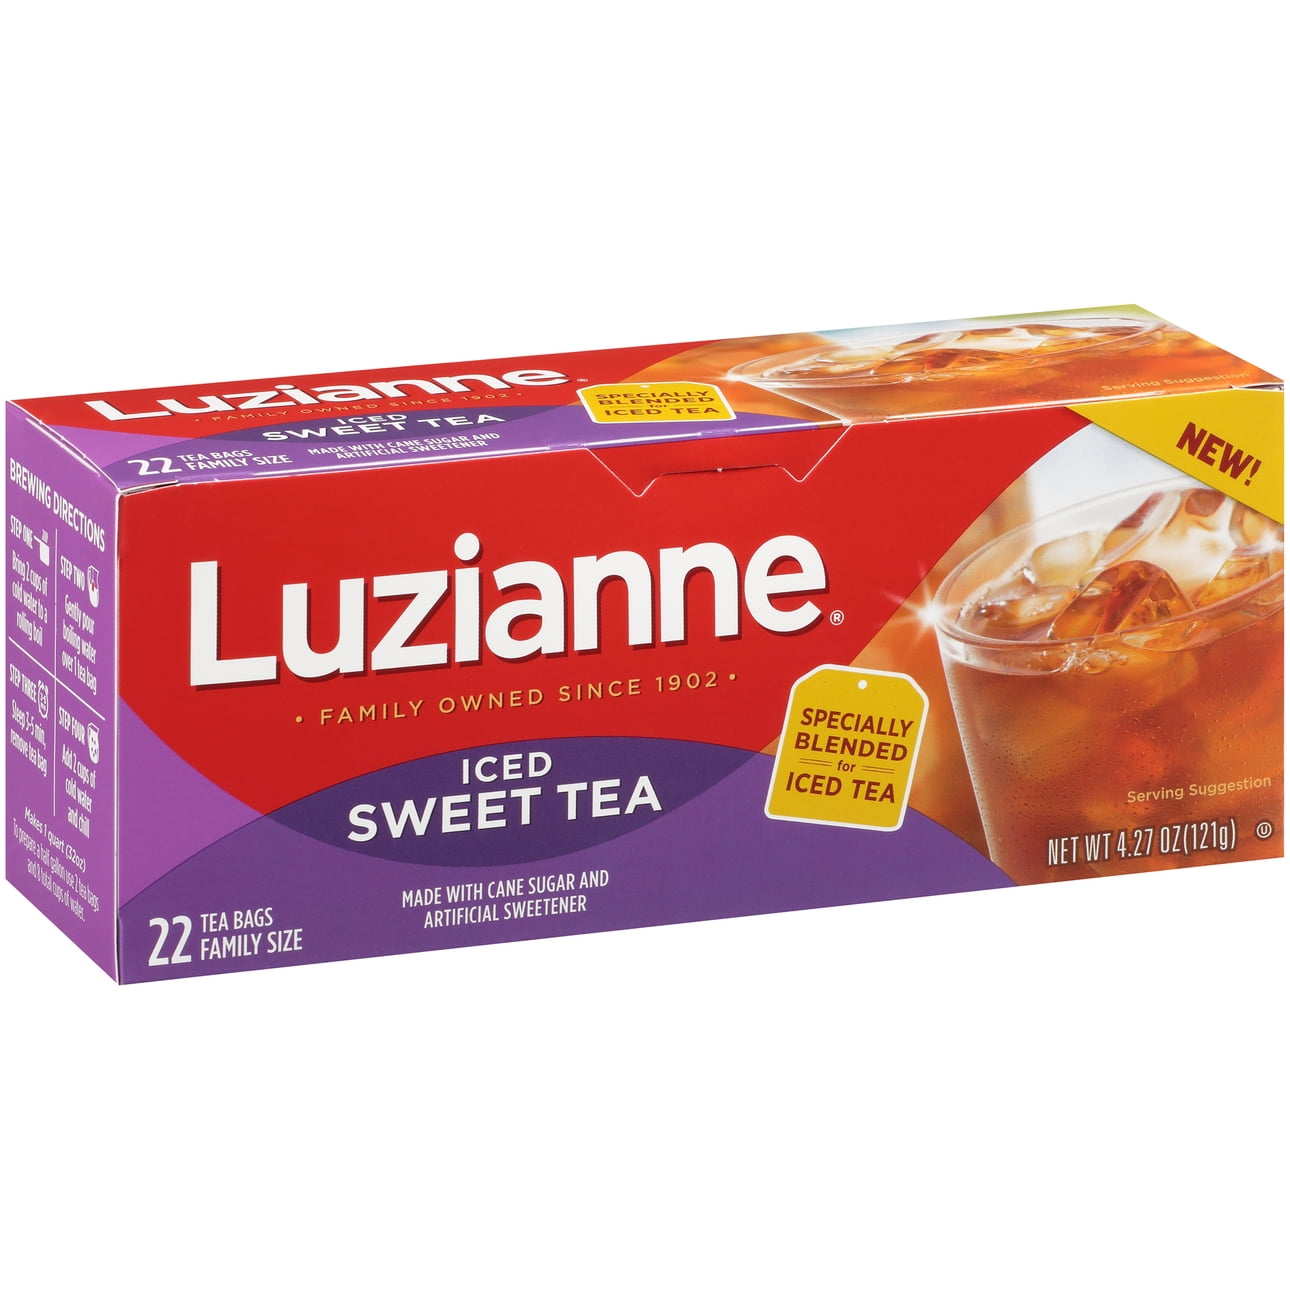 48-ct box Luzianne Specially Blended Iced Tea Bags Pack of 6 Family Size 